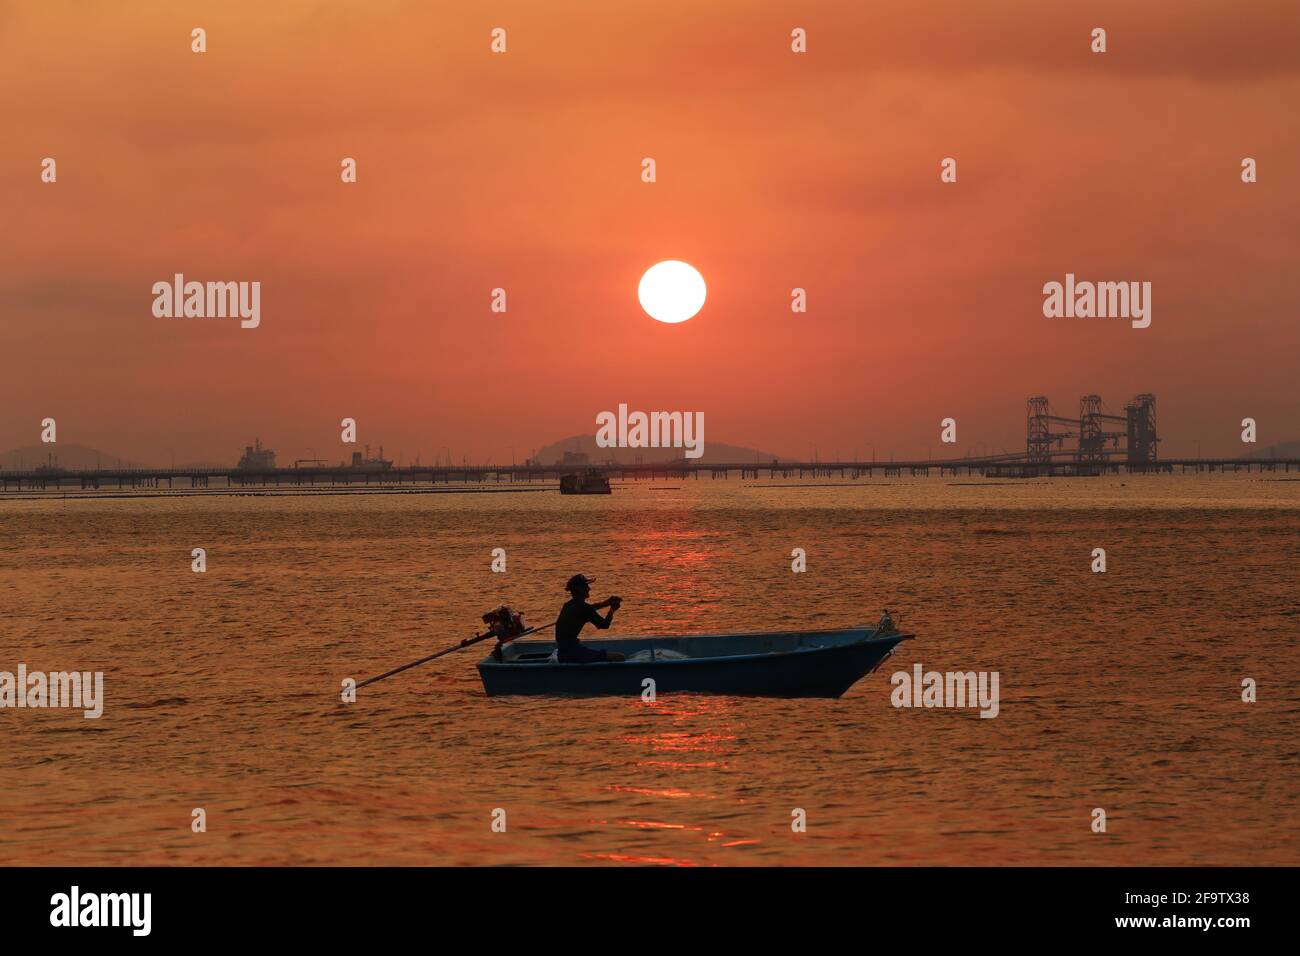 A small boat running in the sea and sunset sky background. Stock Photo